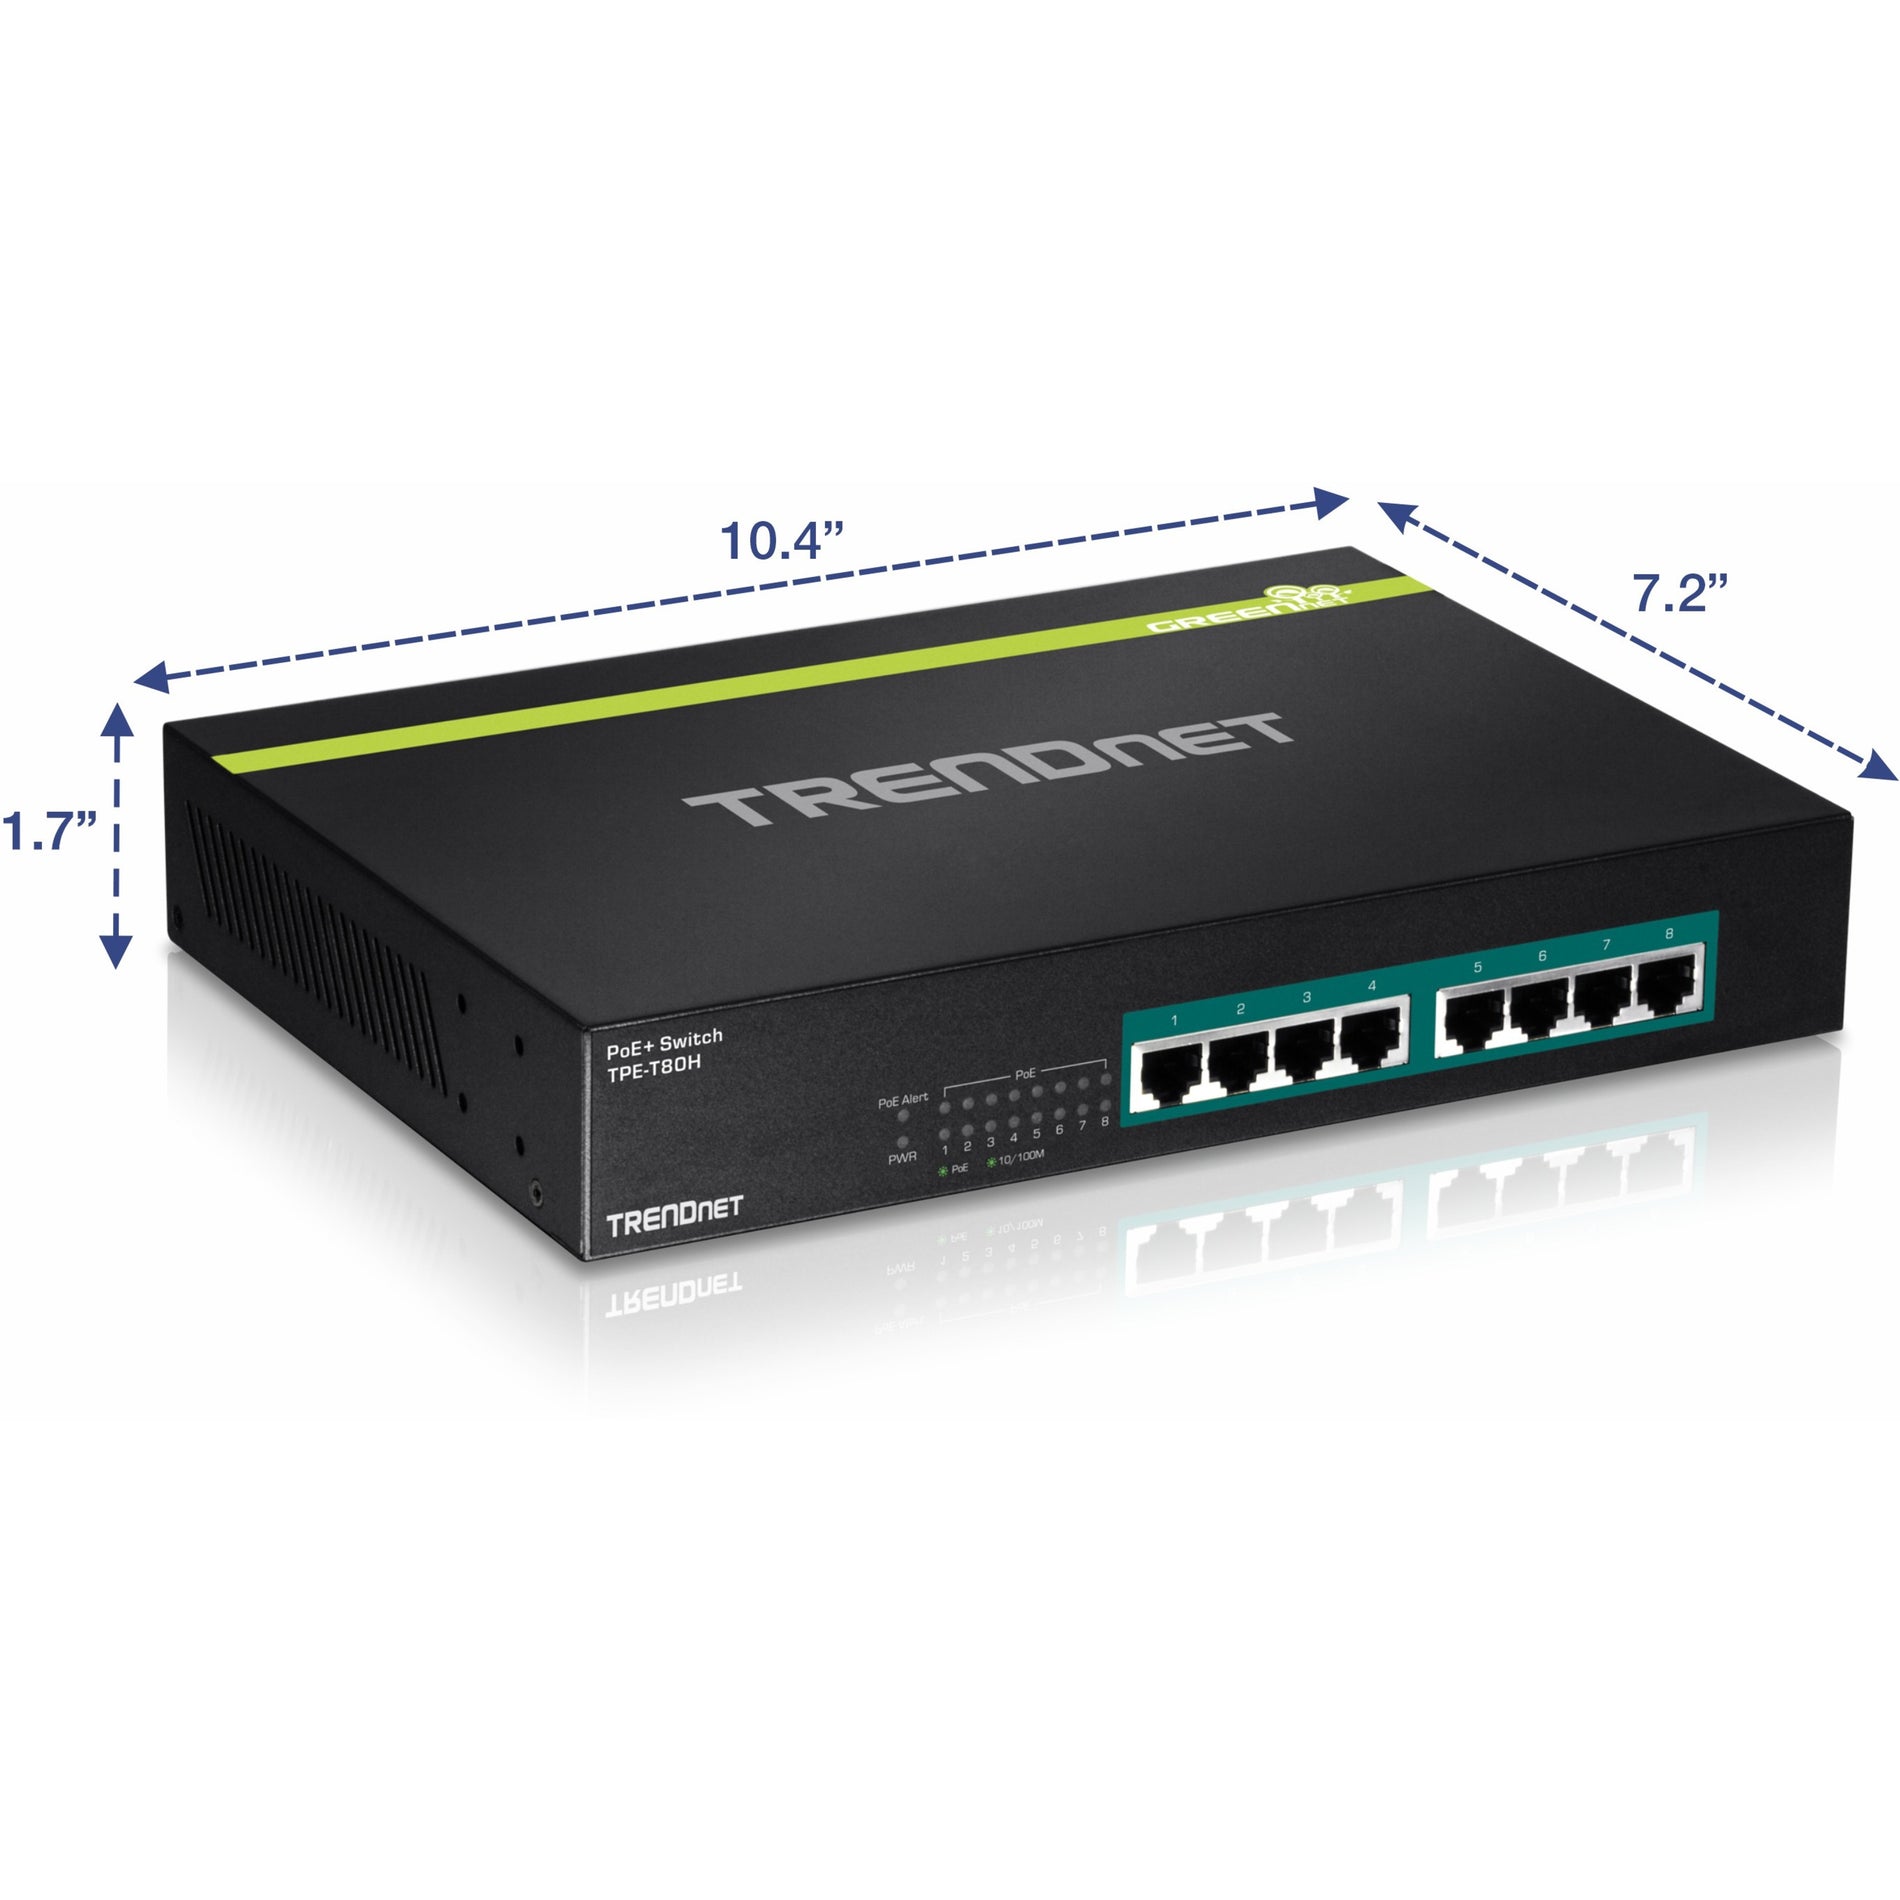 TRENDnet 8-Port 10/100 Mbps GREENnet PoE+ Switch; TPE-T80H; Rack Mountable; 8 x 10/100 Mbps PoE+ Ports; Up to 30 Watts Per Port with 125 W Total Power Budget; Lifetime Protection